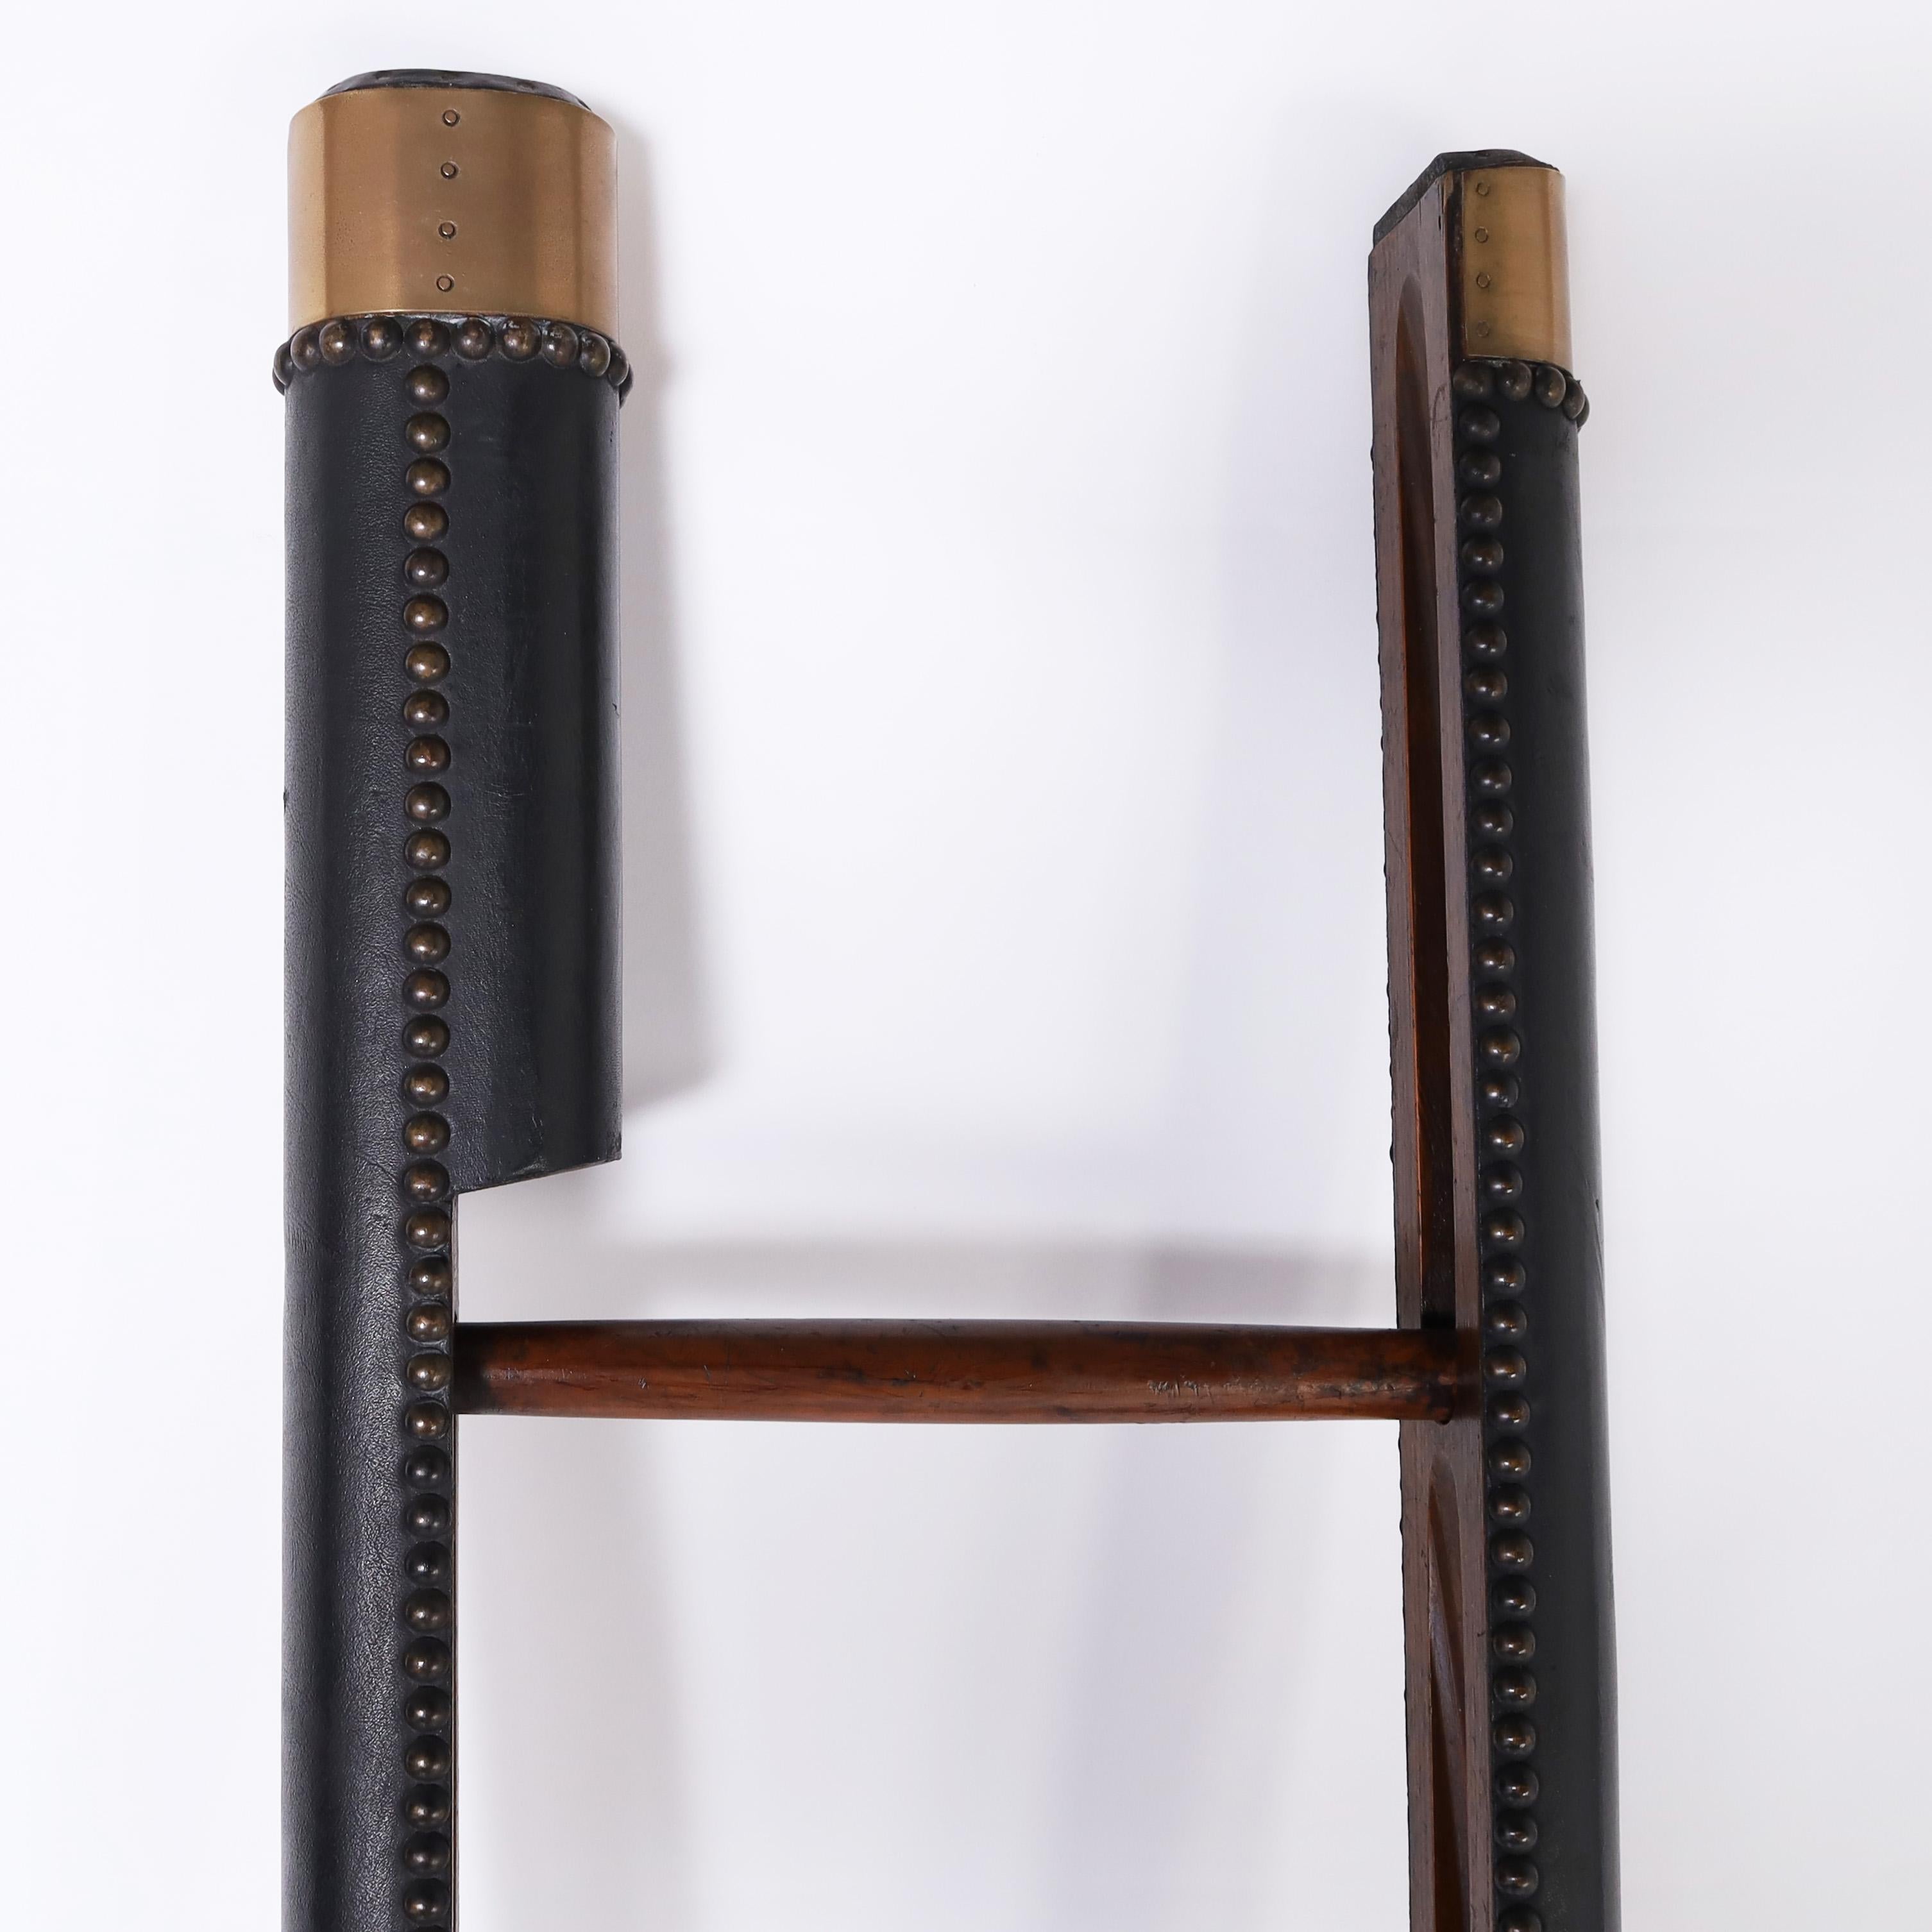 Impressive decorative English library ladder crafted in hardwoods with an ingenious folding mechanism and featuring leather covering with brass tacks, caps and feet. 

Folded dimensions H: 103 W: 3.5 D: 3